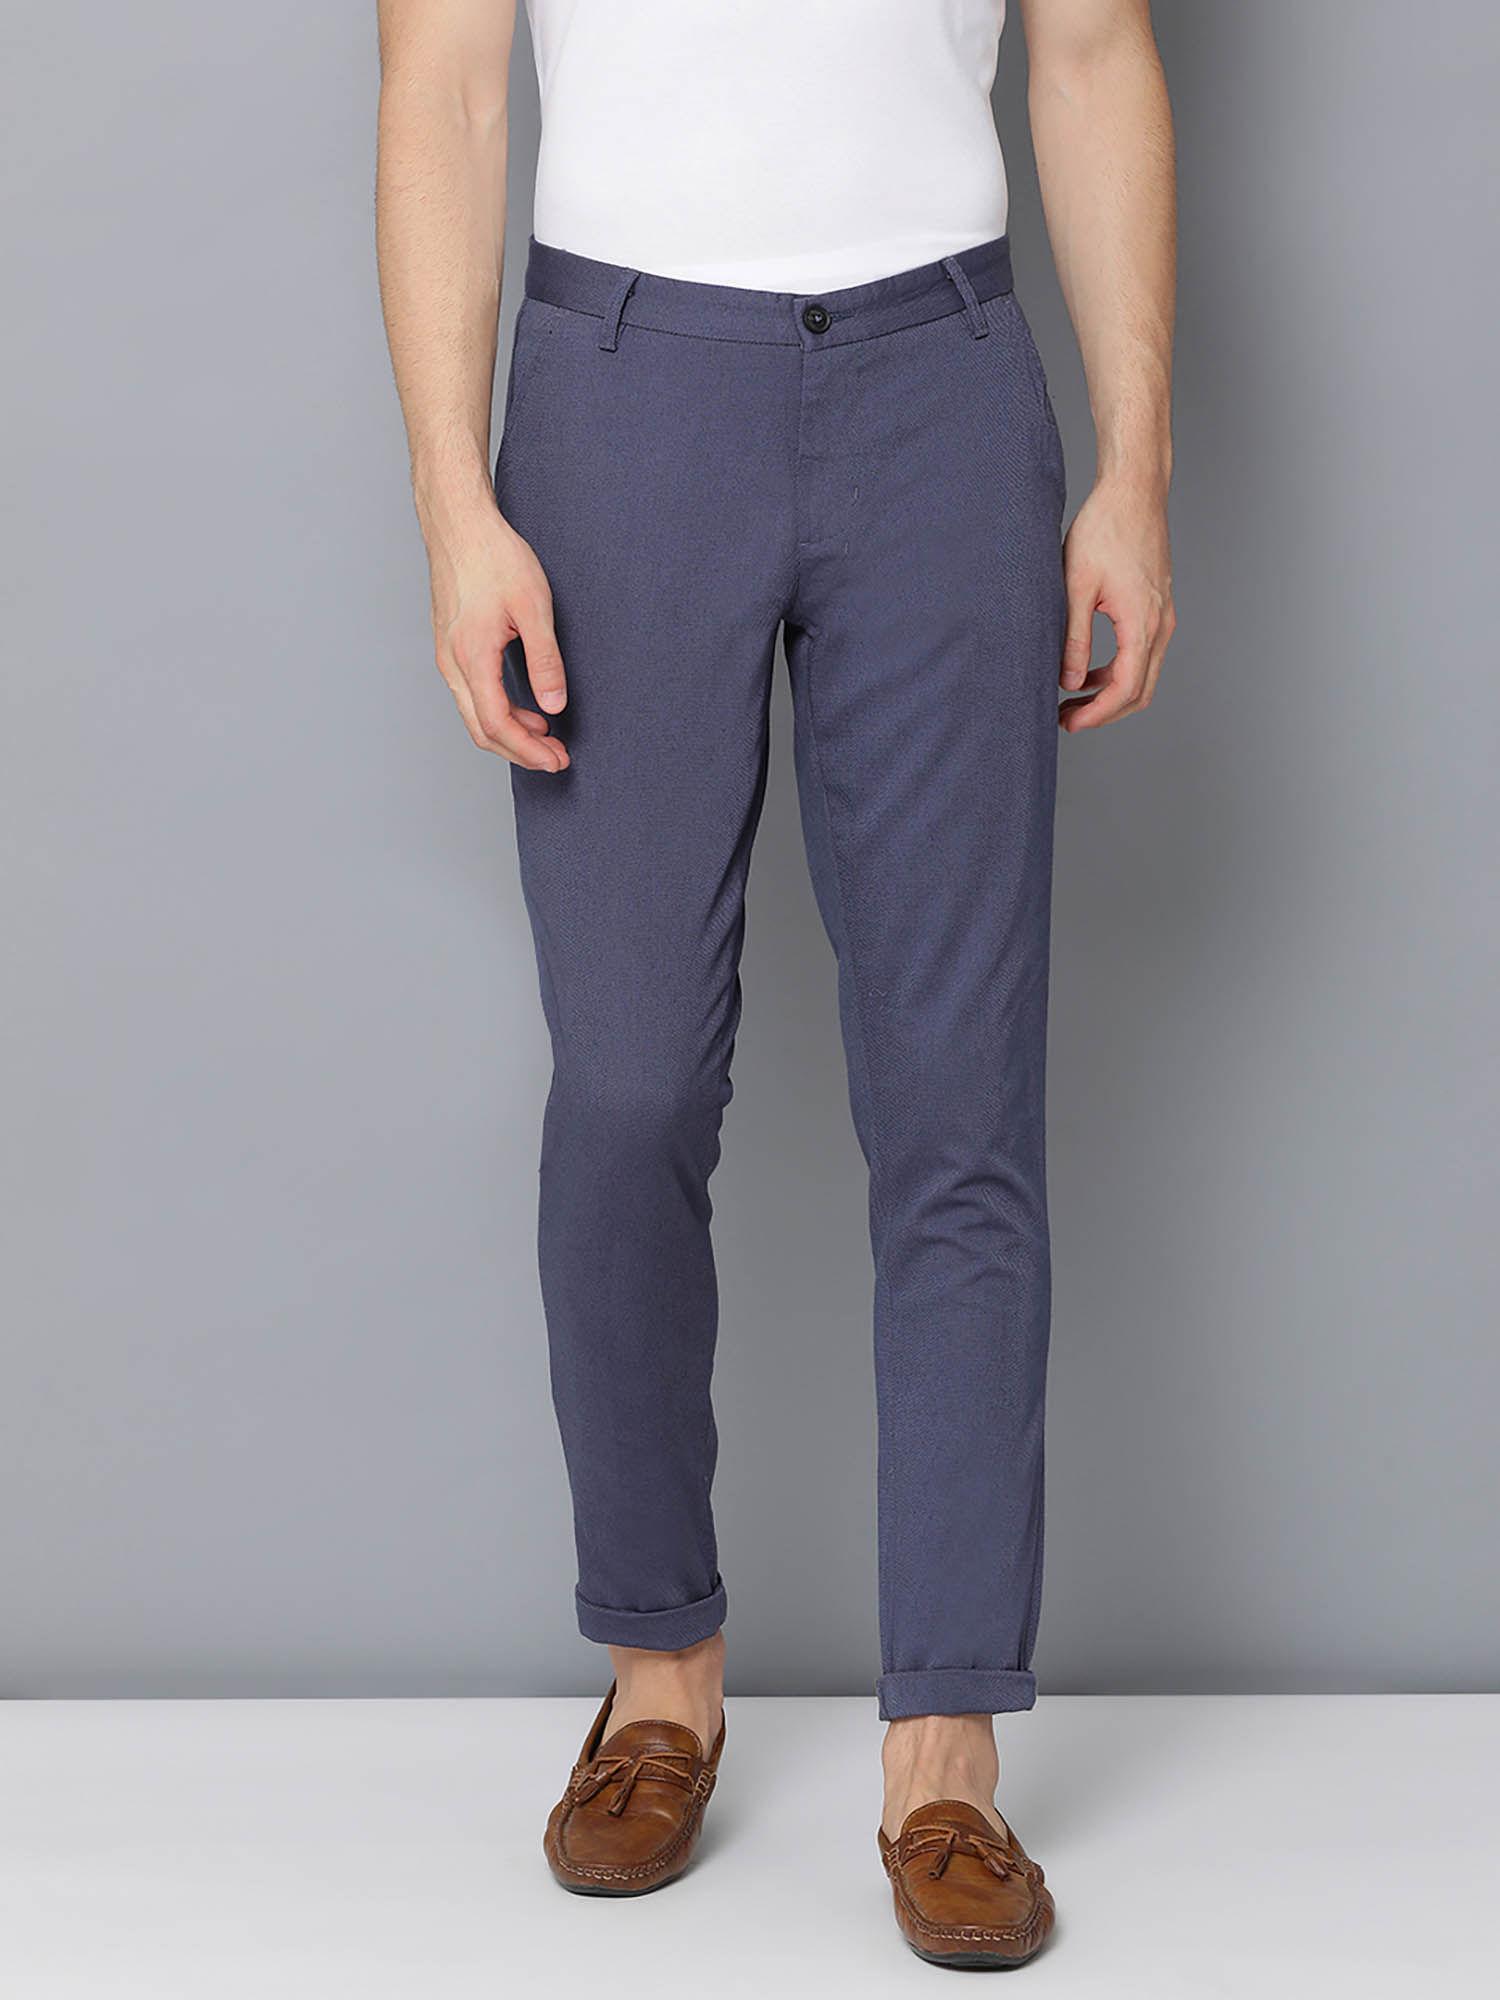 navy blue solid slim fit chinos